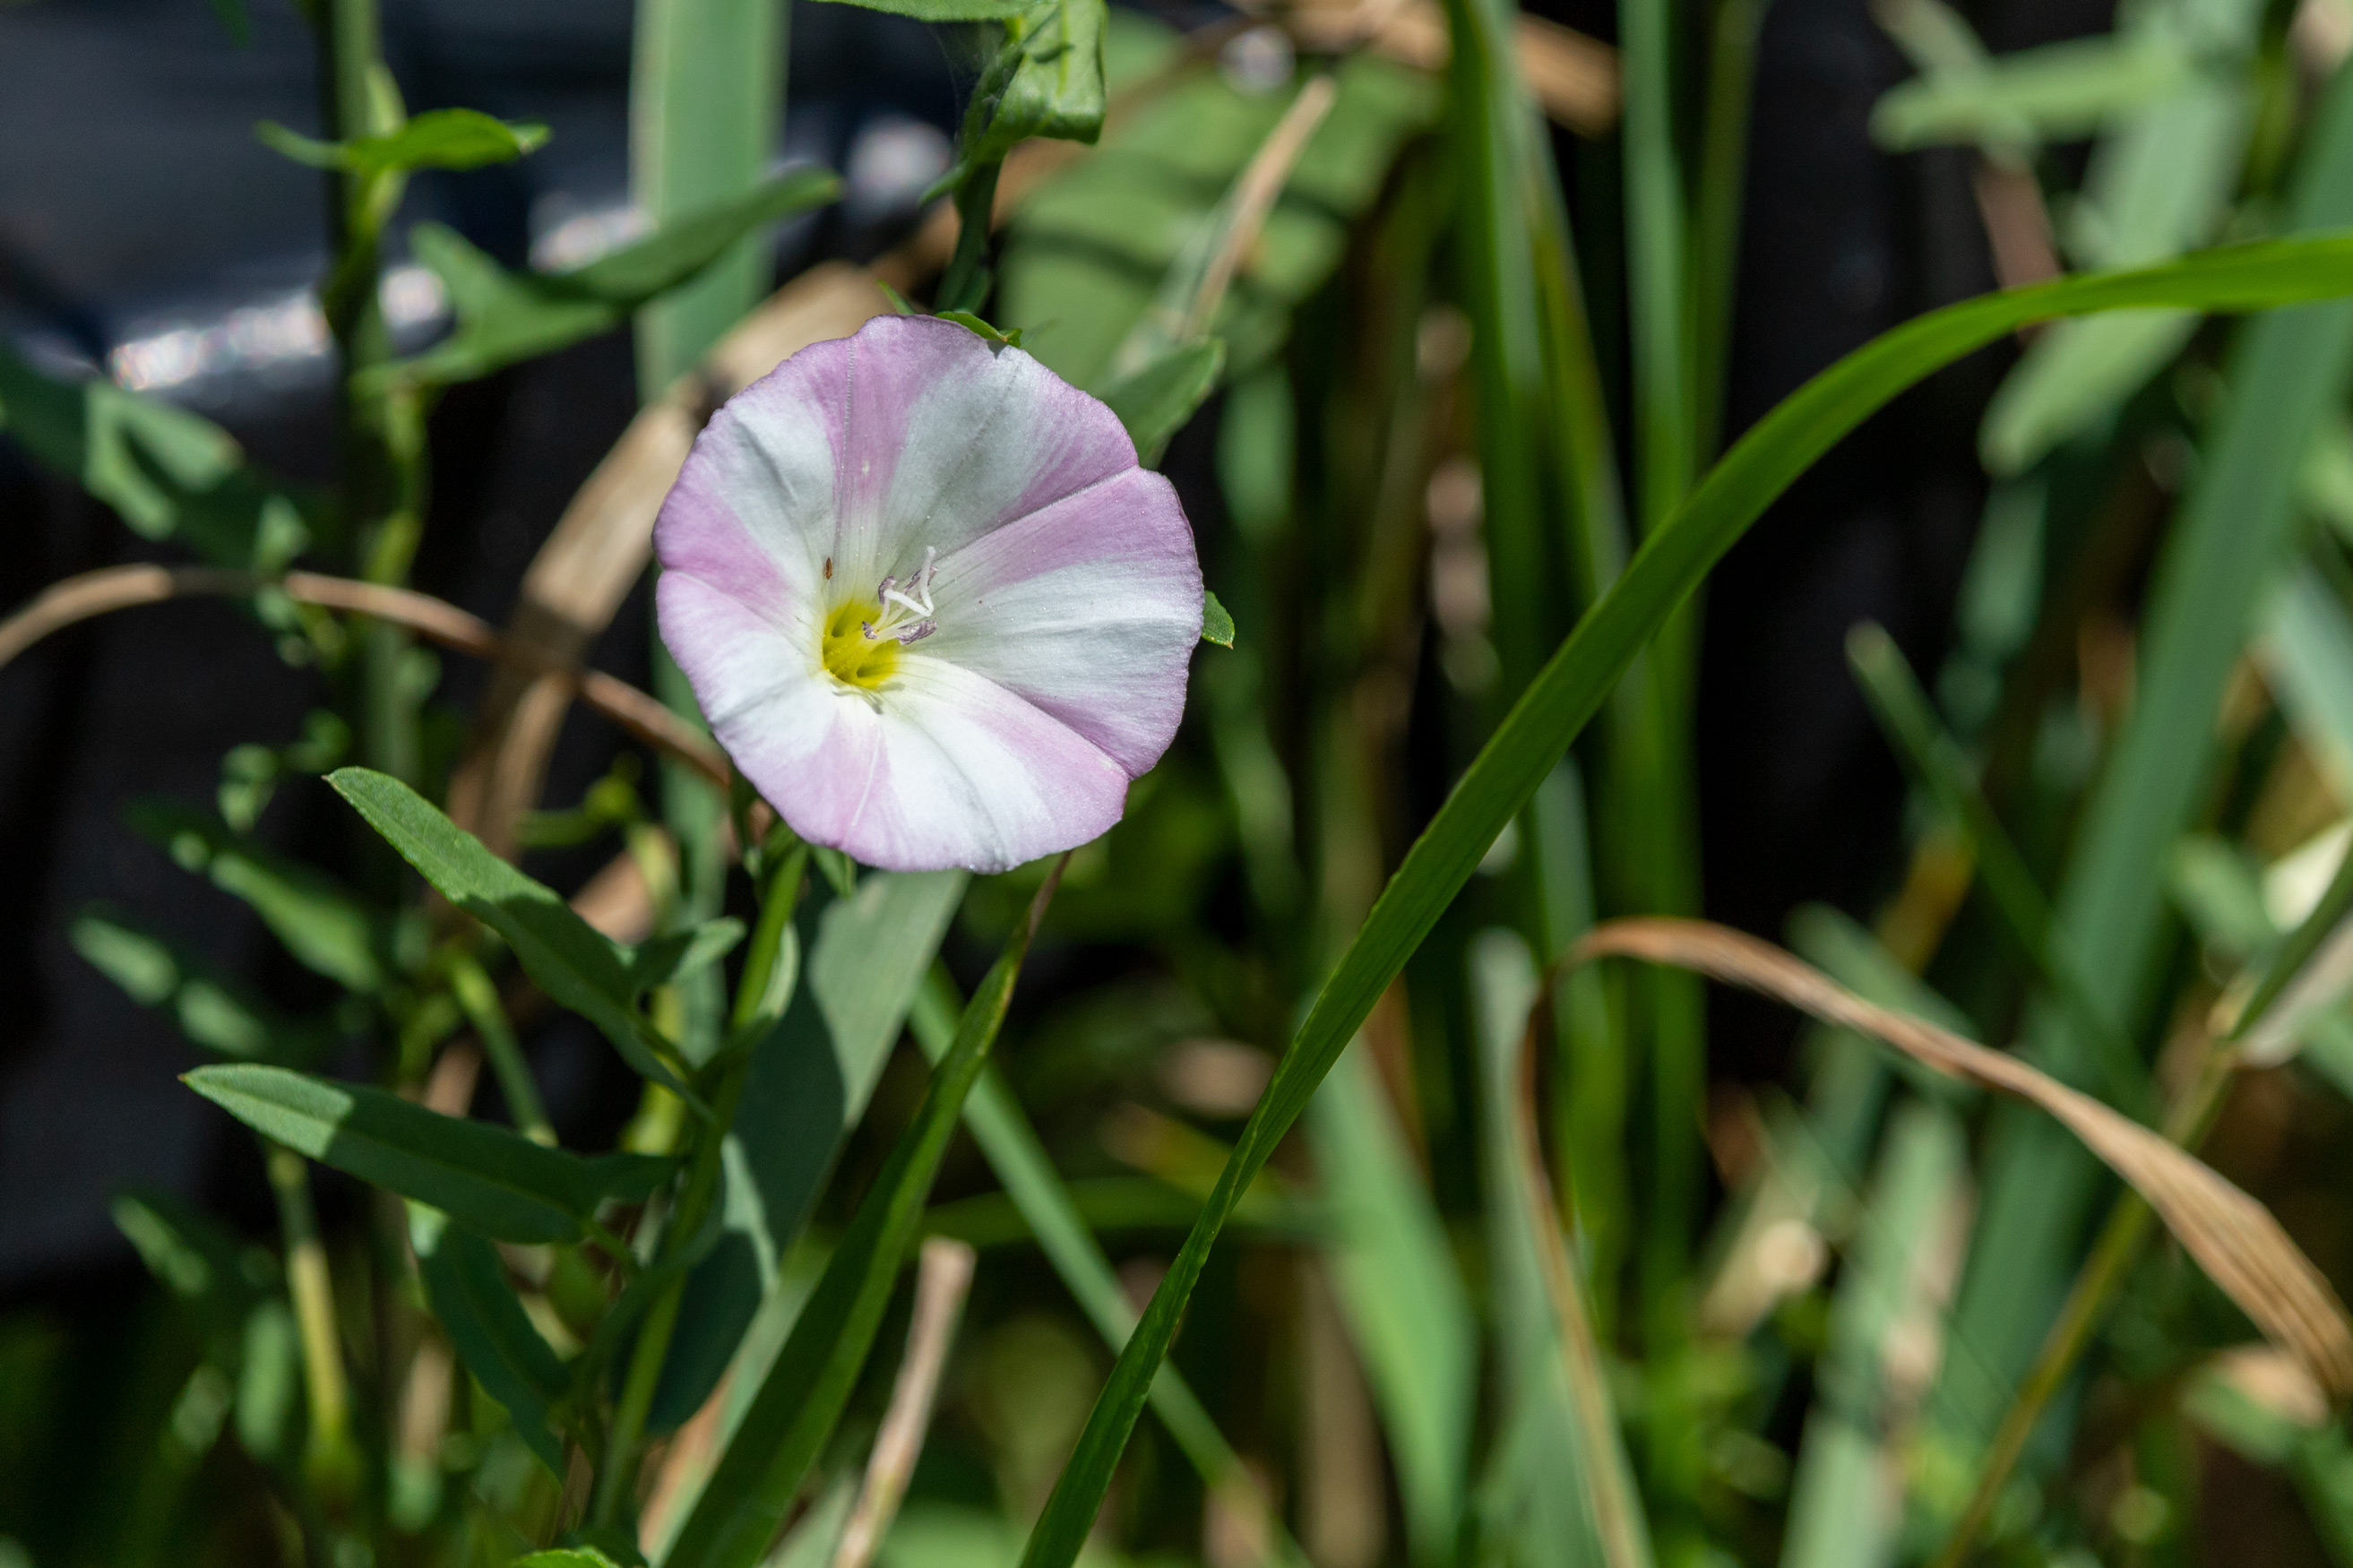 Pink and white-striped flower with a yellow centre and long green leaves